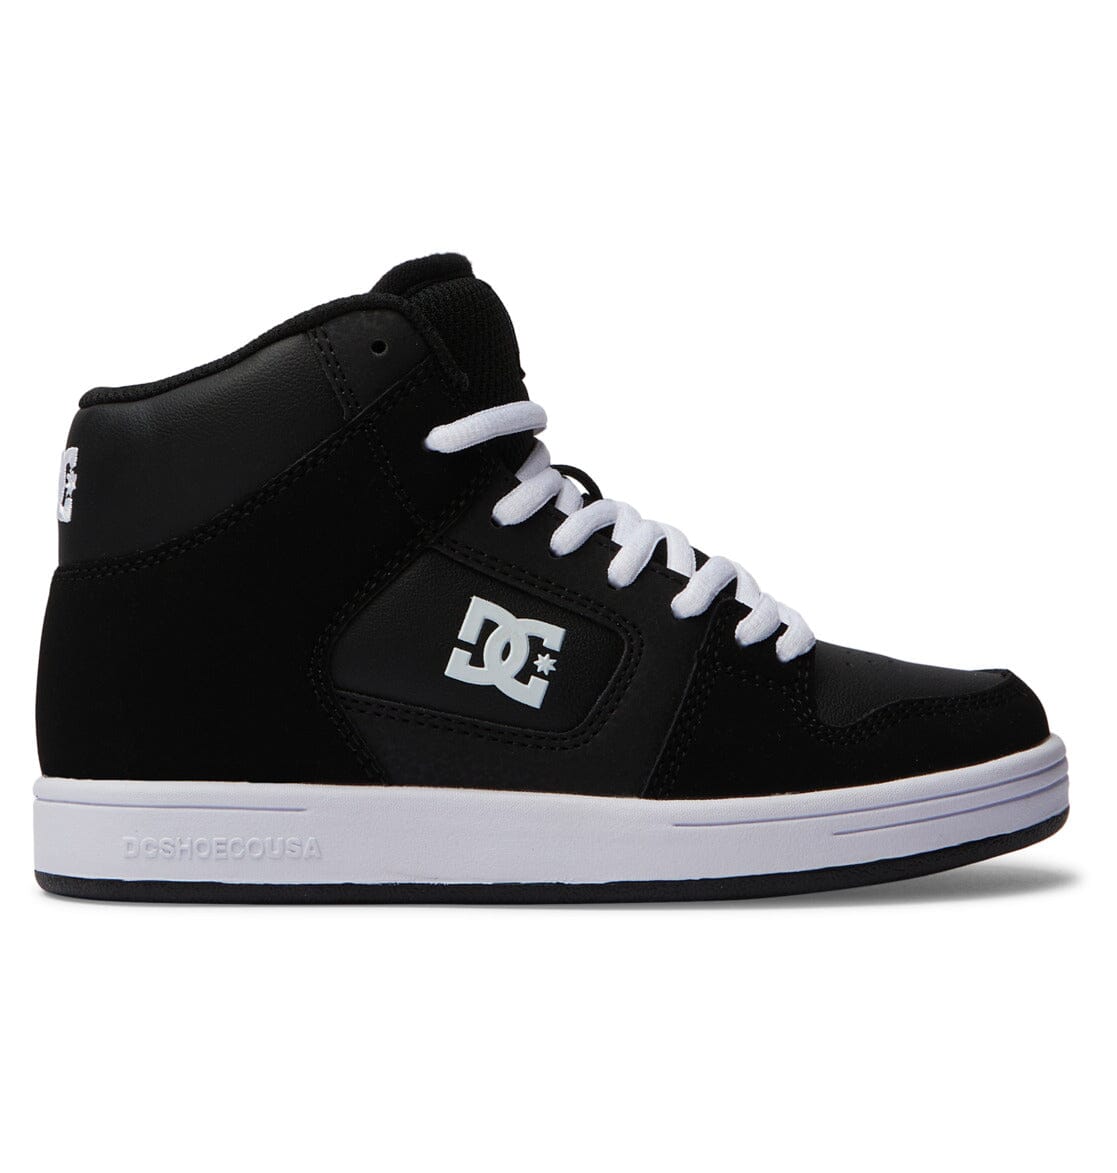 DC Youth Manteca 4 Hi Shoes Black/Black/White Youth and Toddler Skate Shoes DC 